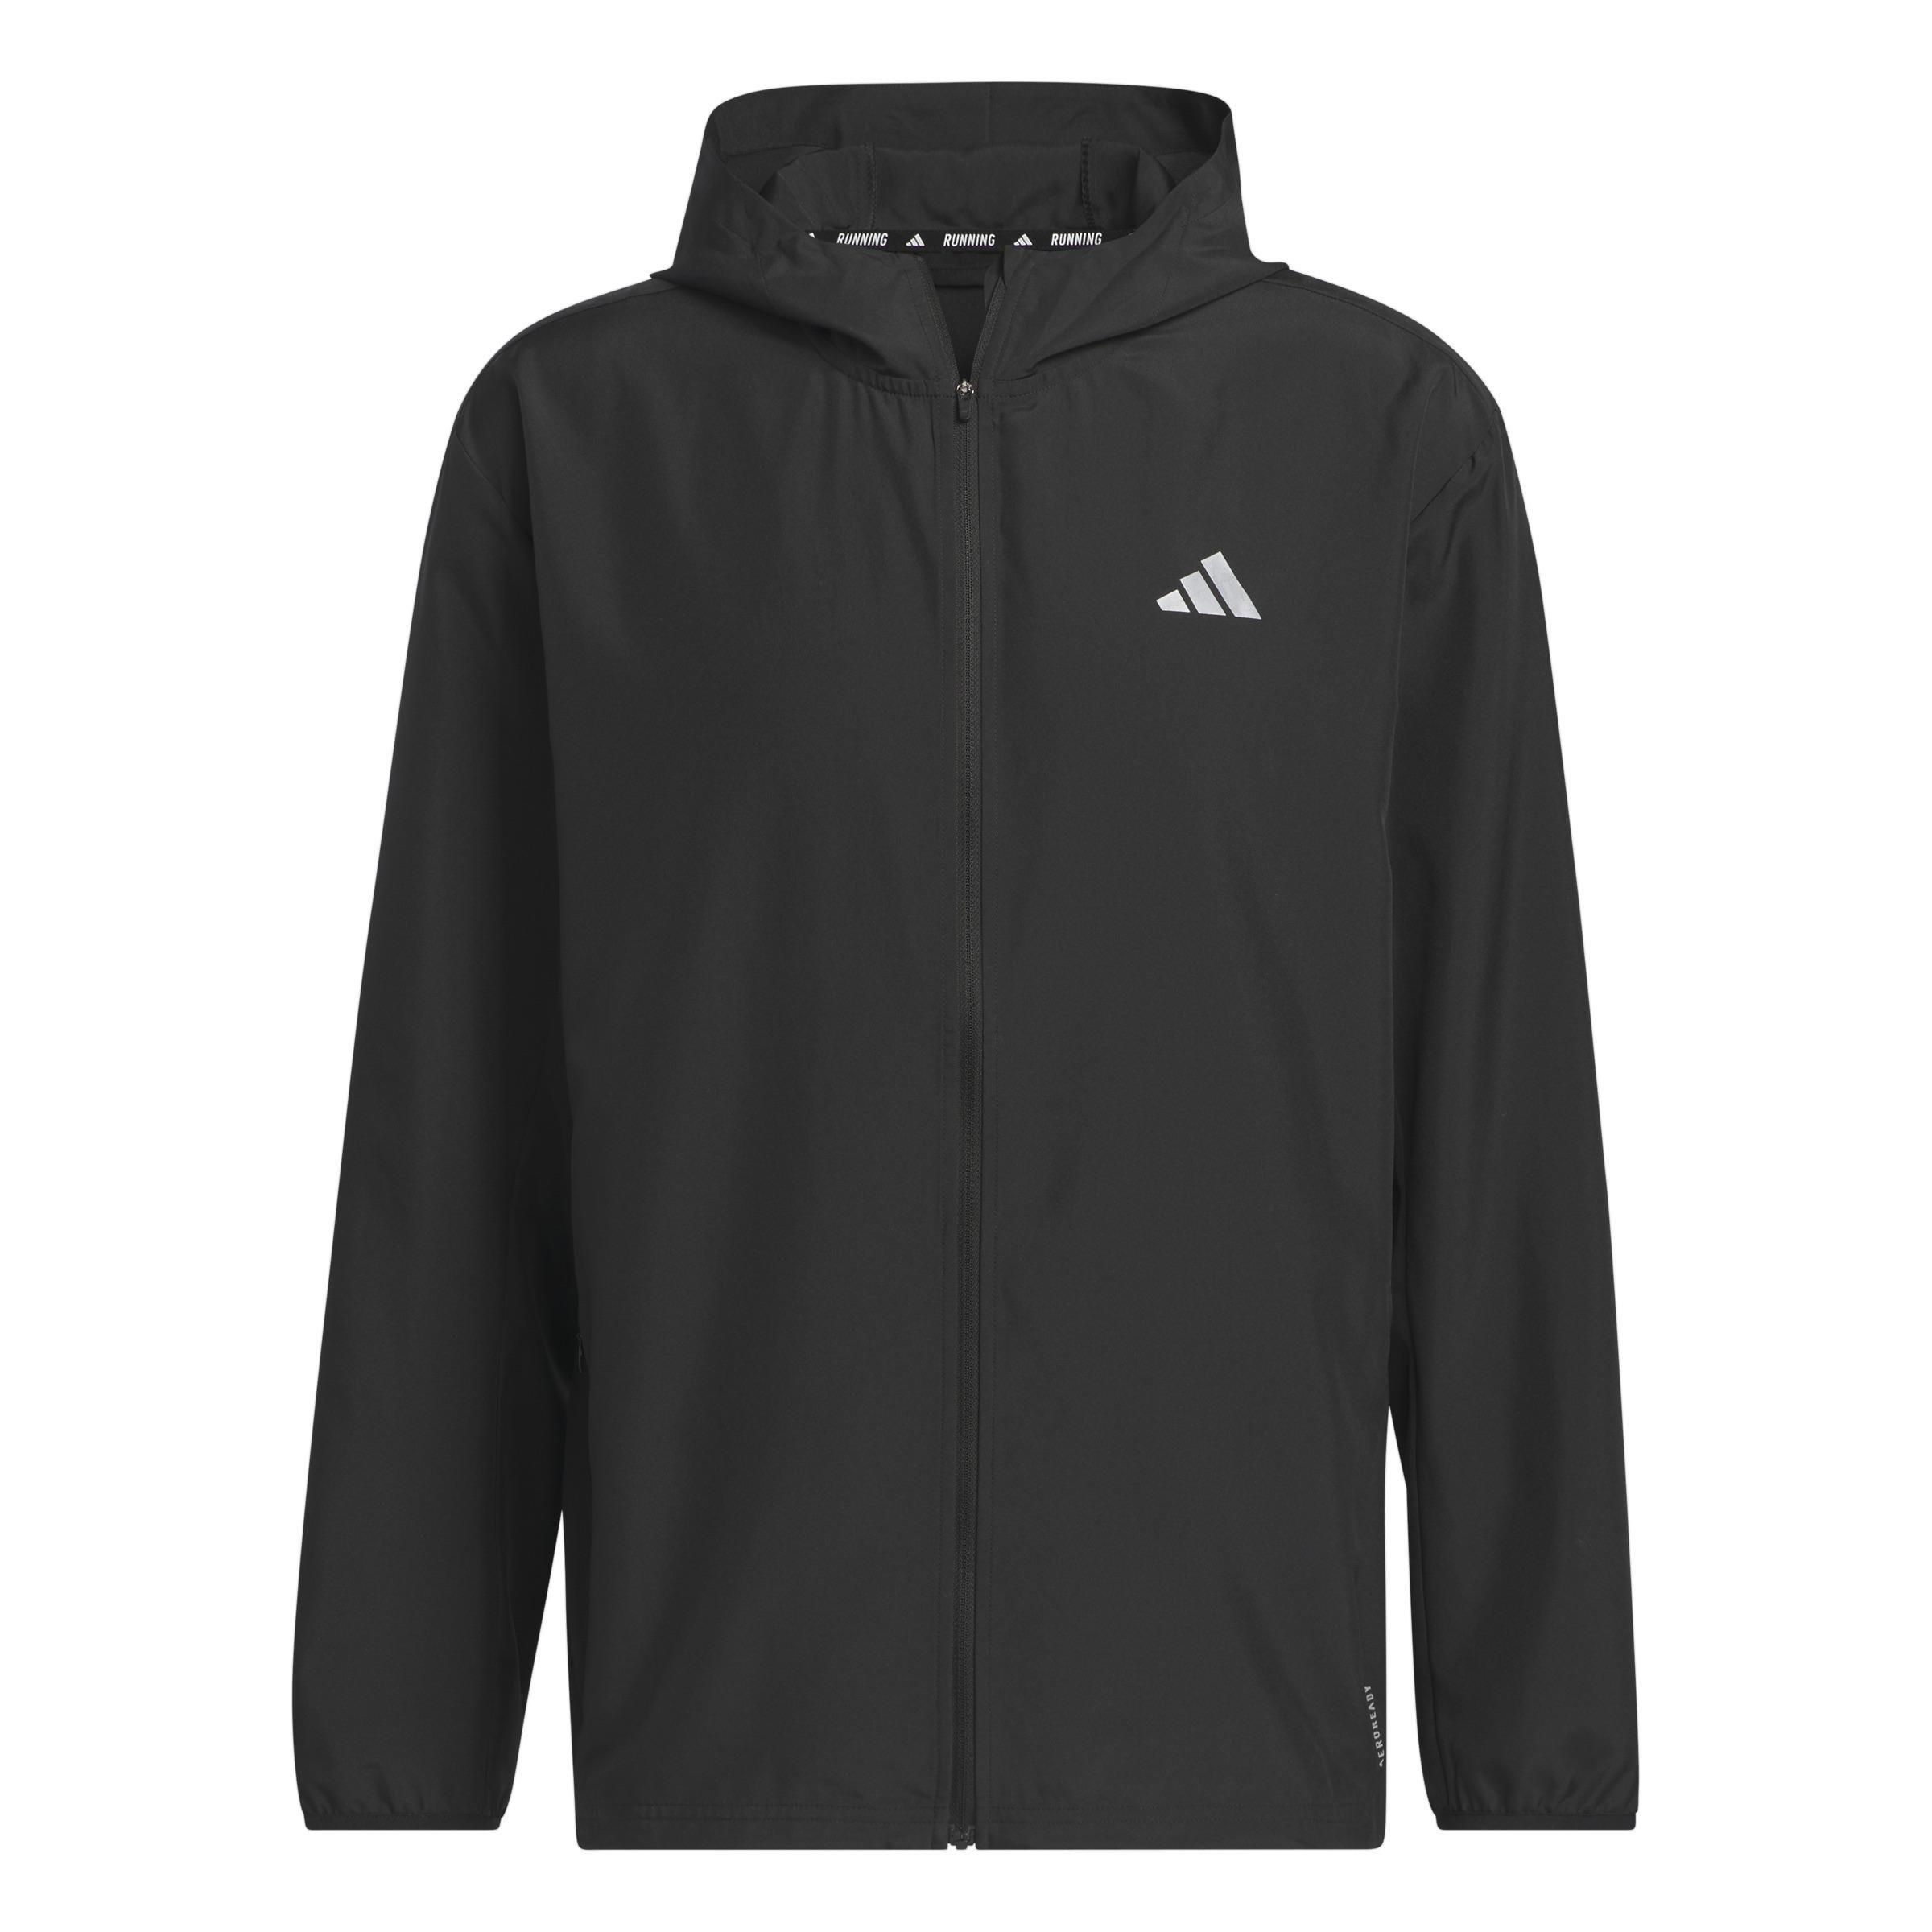 Run It Jacket BLACK Male Adult, A701_ONE, large image number 0